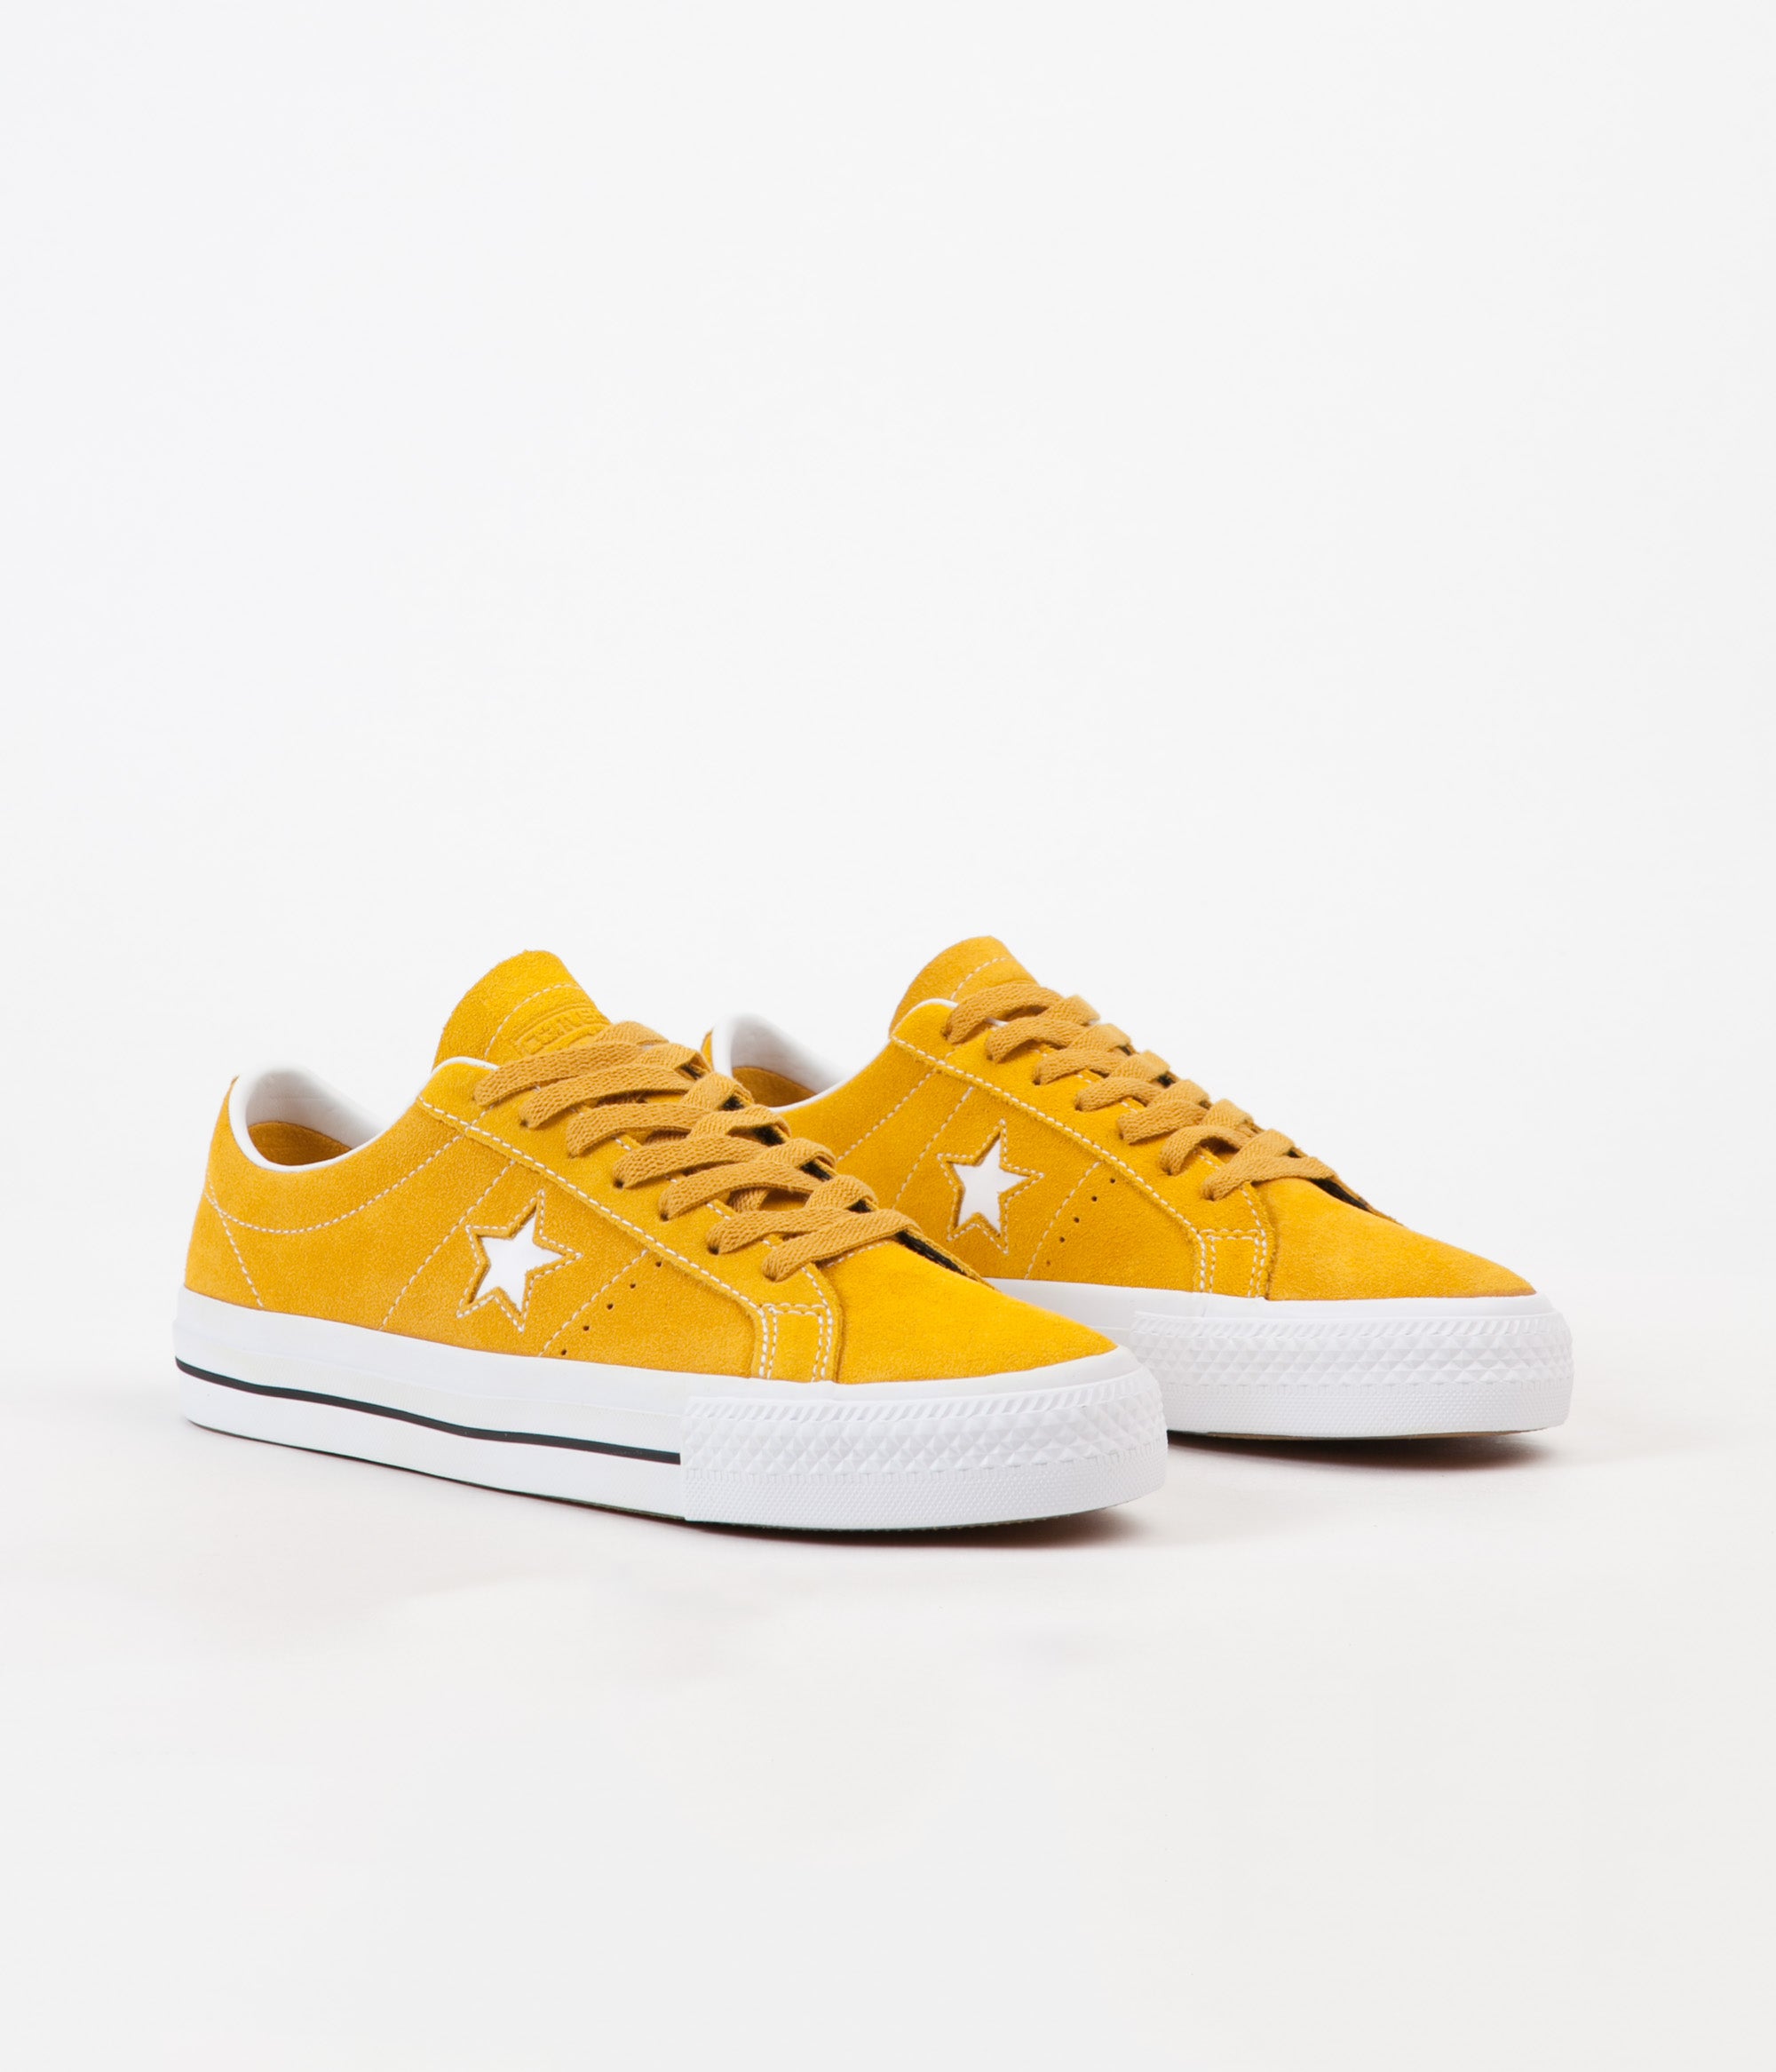 converse one star suede yellow